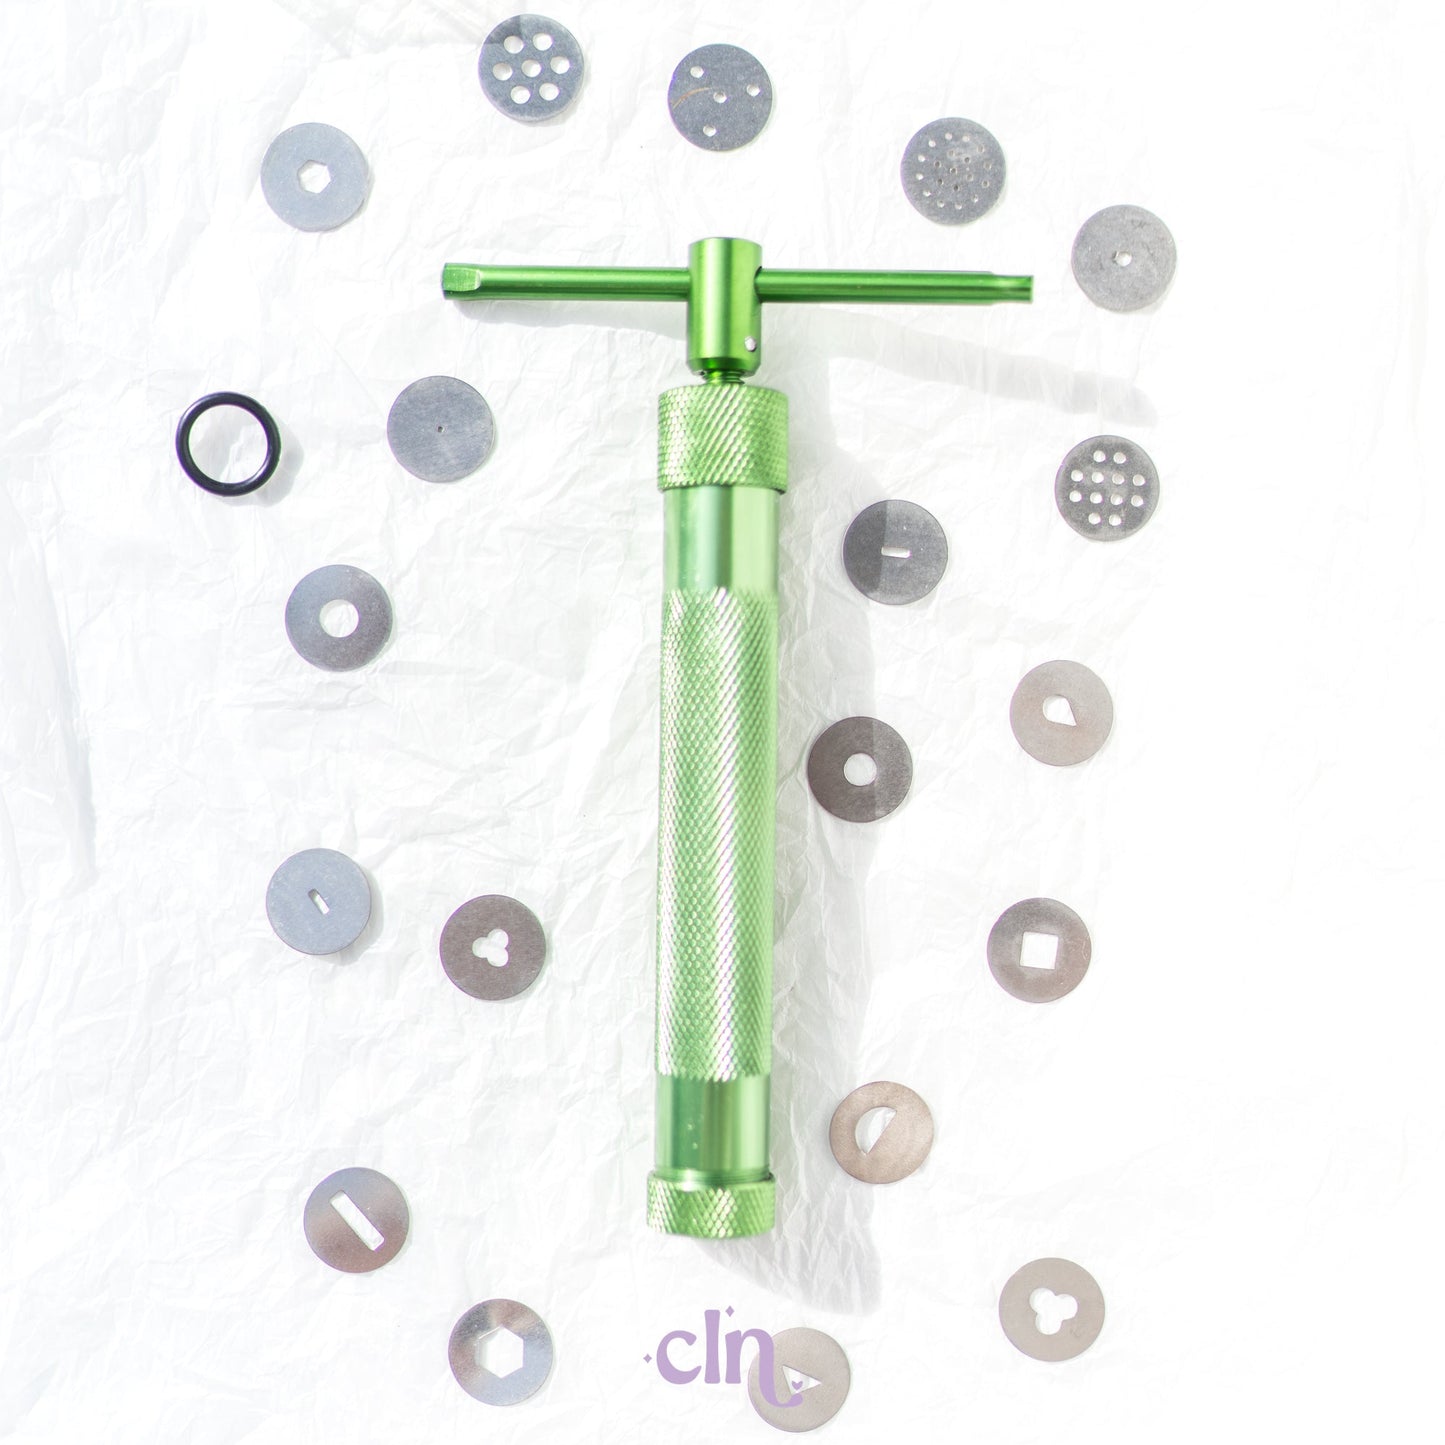 Clay extruder - Curated tools - CLN Atelier